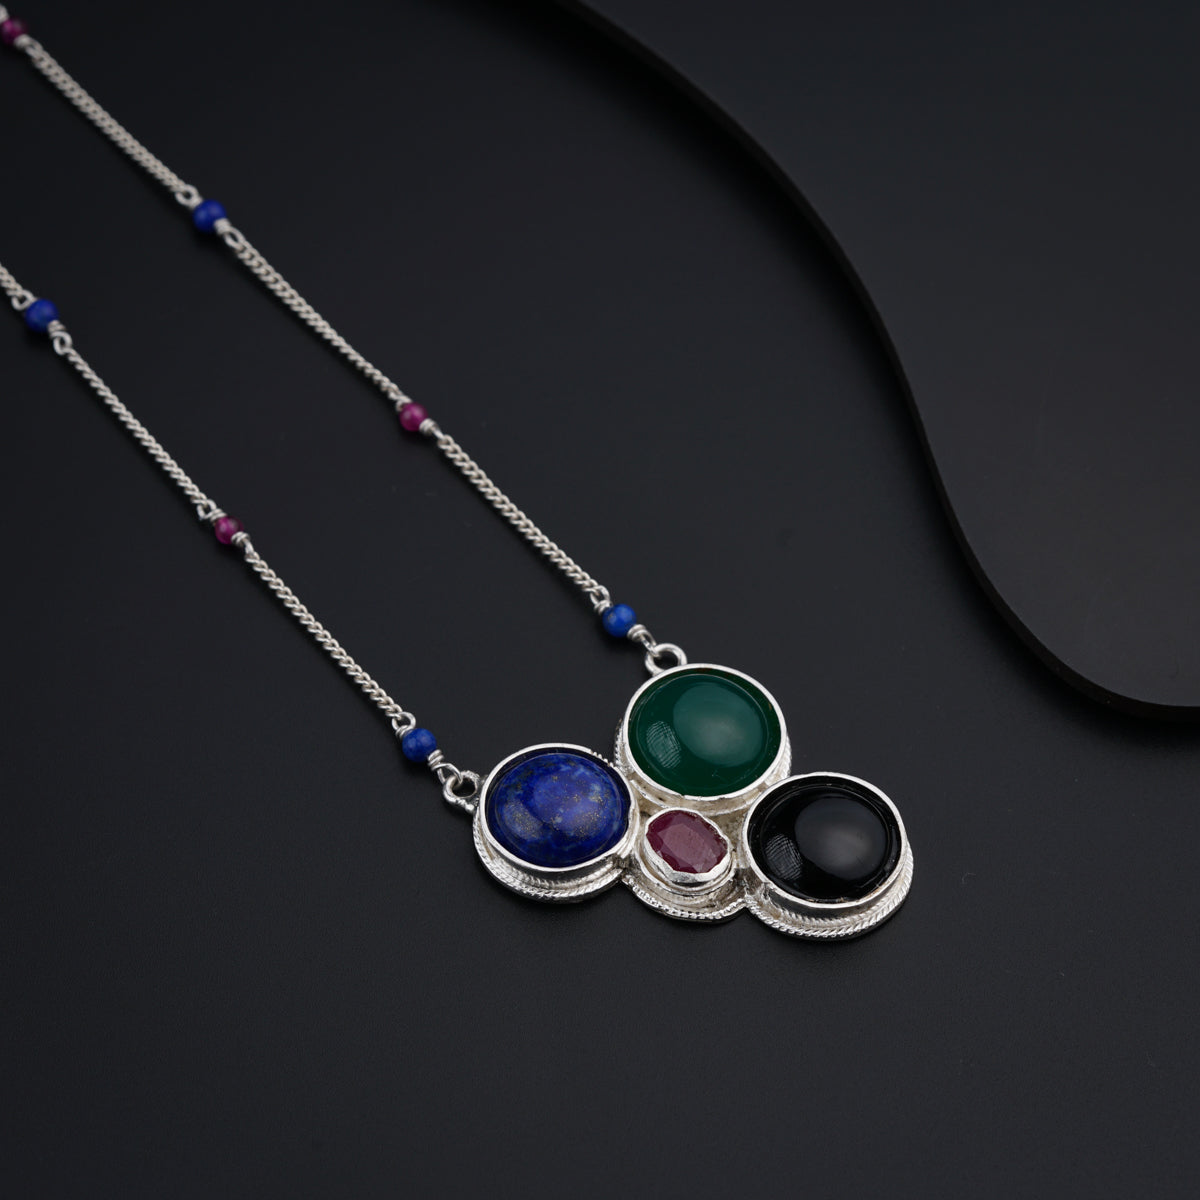 a necklace with three different colored stones on it